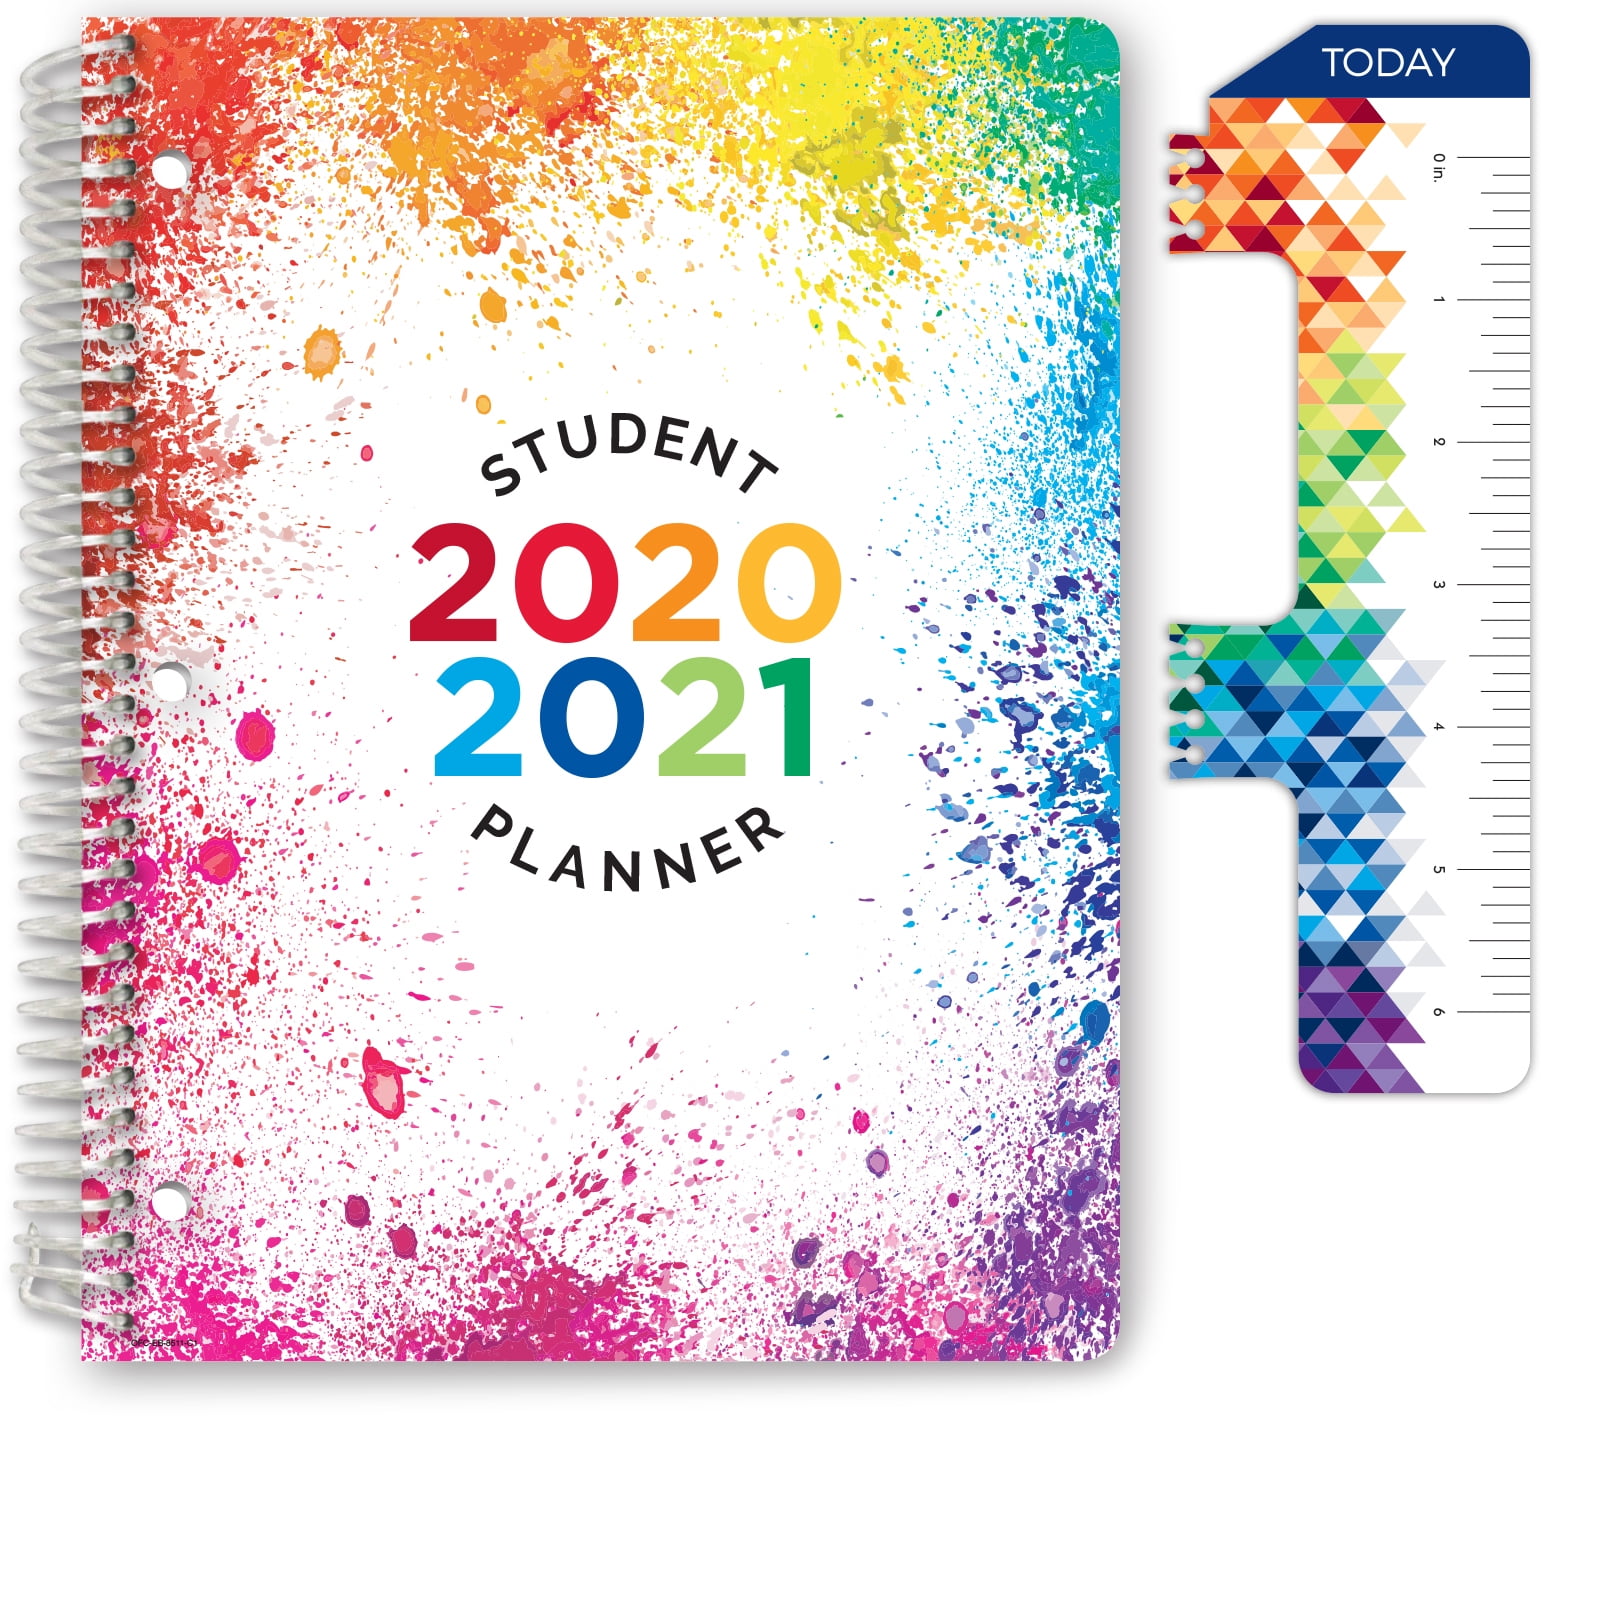 Painted Mini Hardback Patterned Student Planner for 2020 